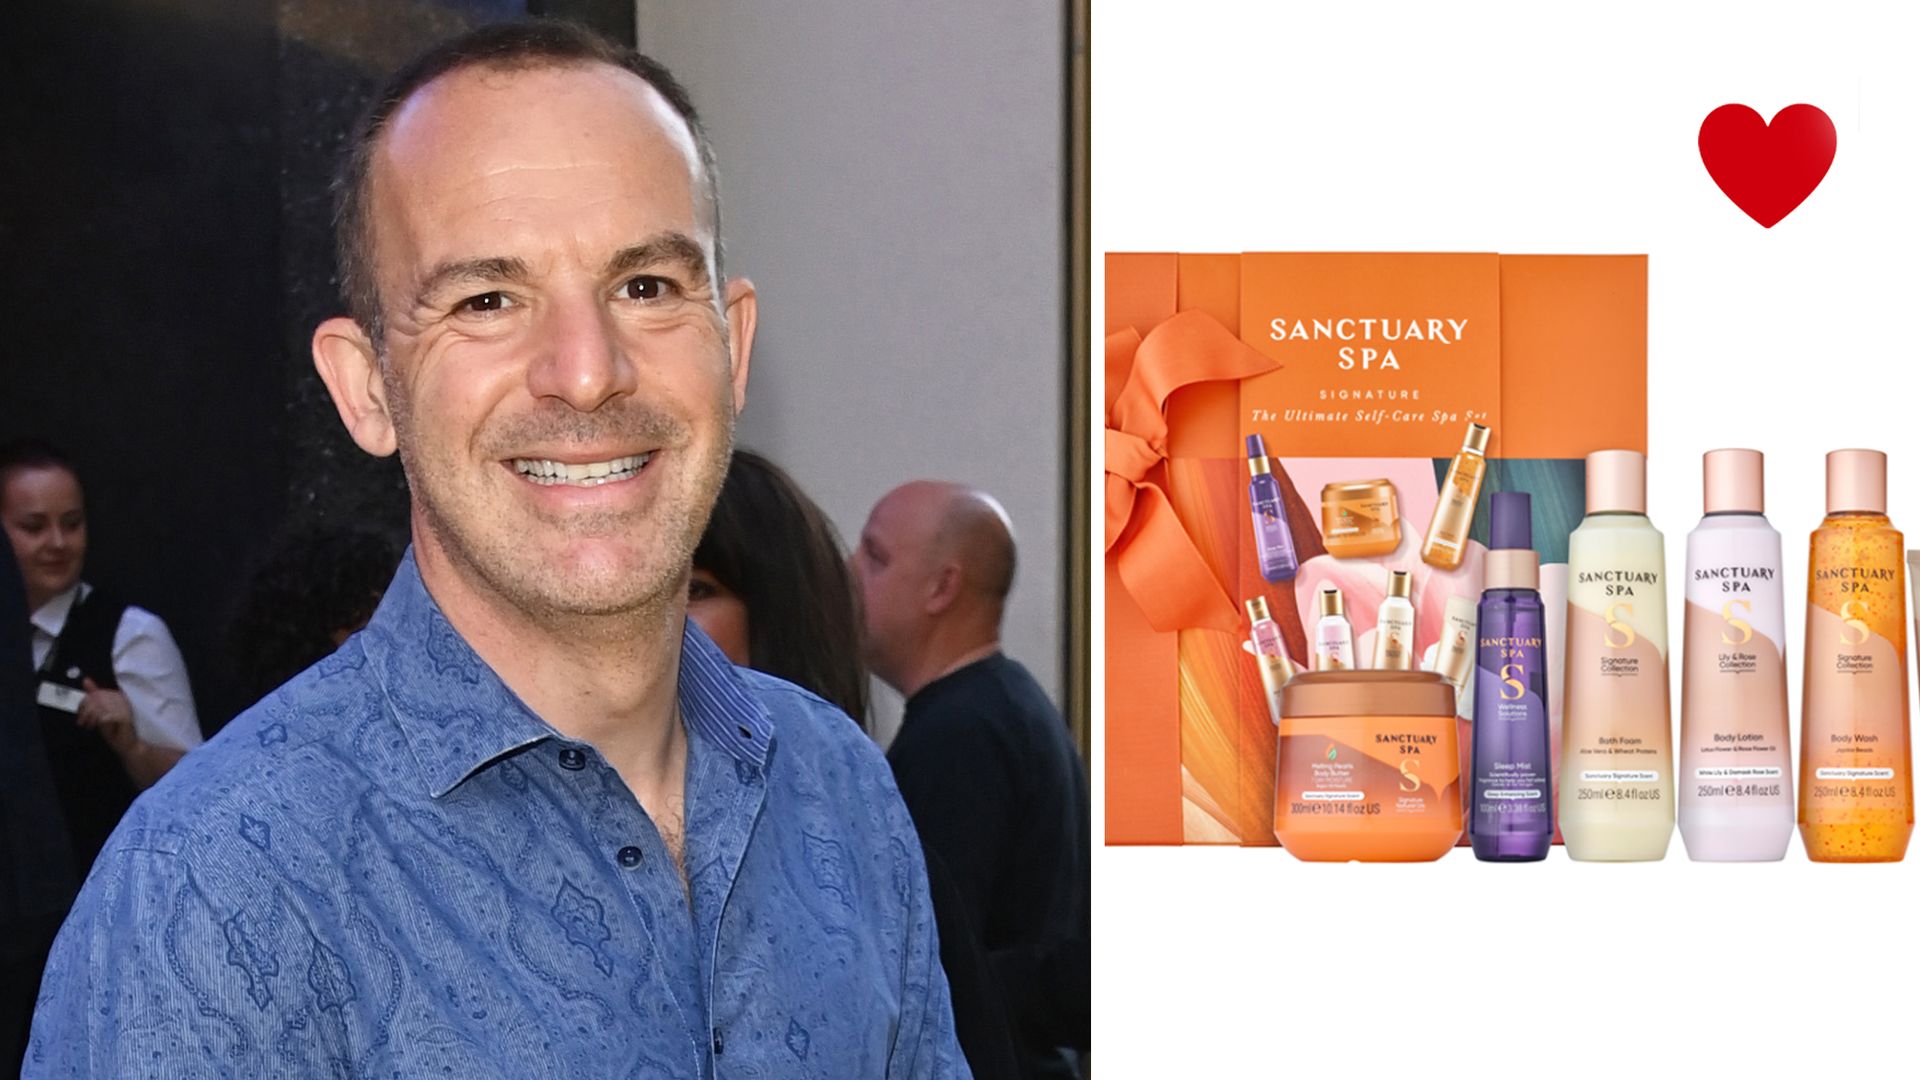 Martin Lewis has shoppers rushing to save 50% on this Sanctuary Spa beauty gift set